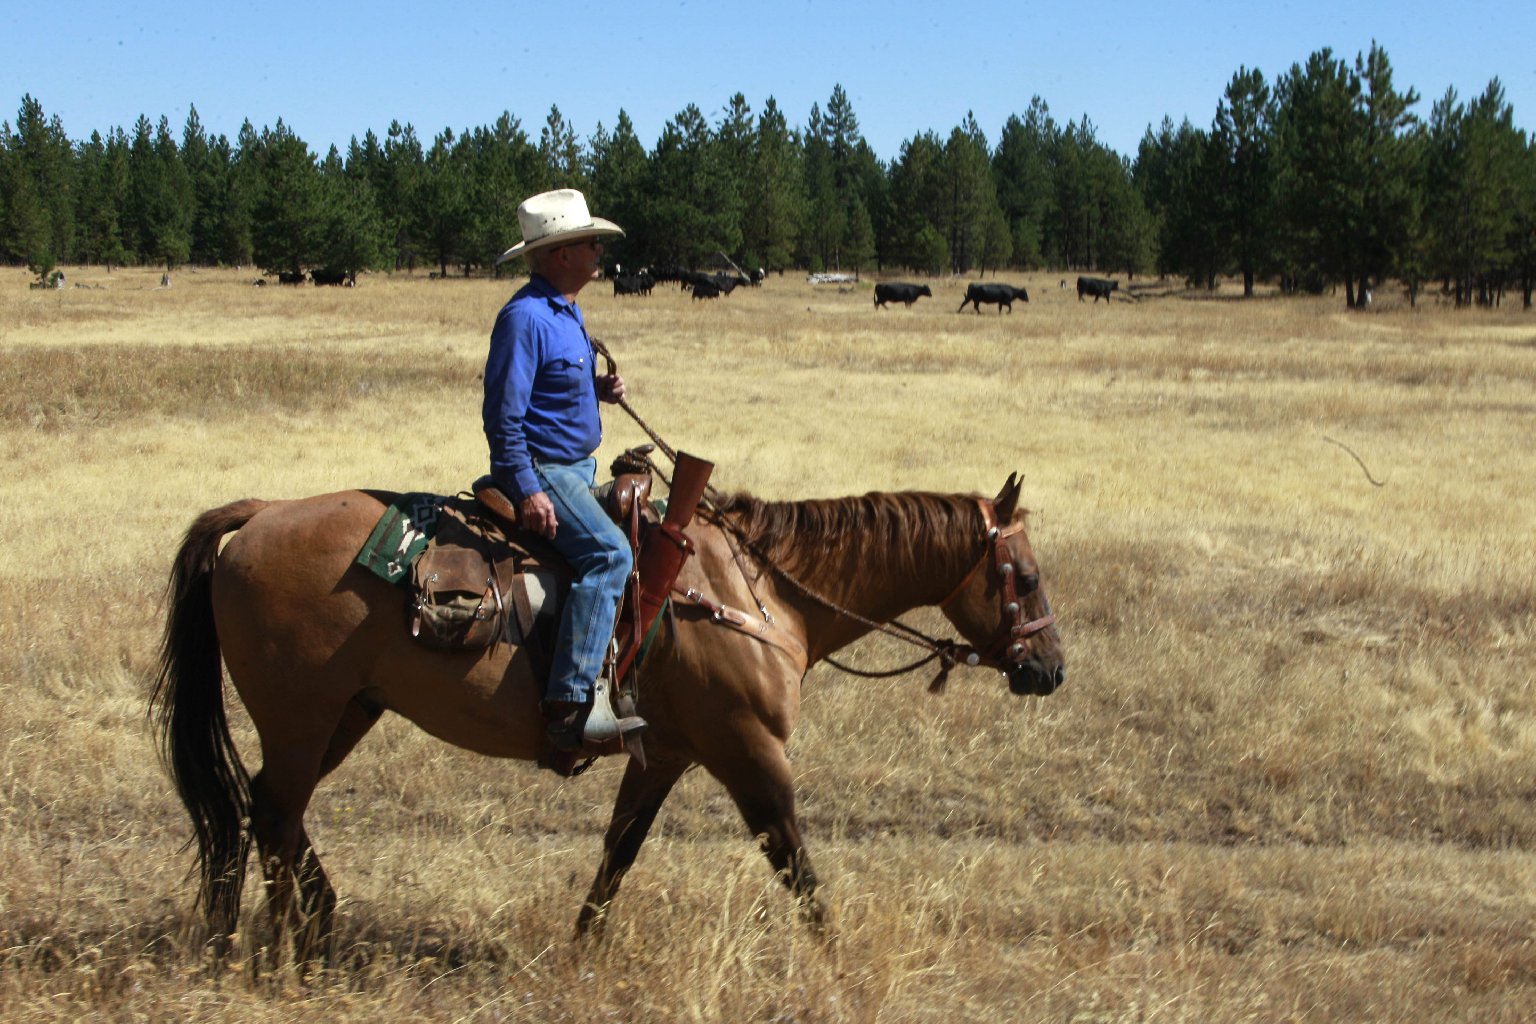 Rancher Denny Johnson, looks over his cattle in Joseph, Ore., in 2011. Conservationists say ranchers raising beef cattle are responsible for the decline of some wildlife. Photo: Rick Bowmer/ASSOCIATED PRESS